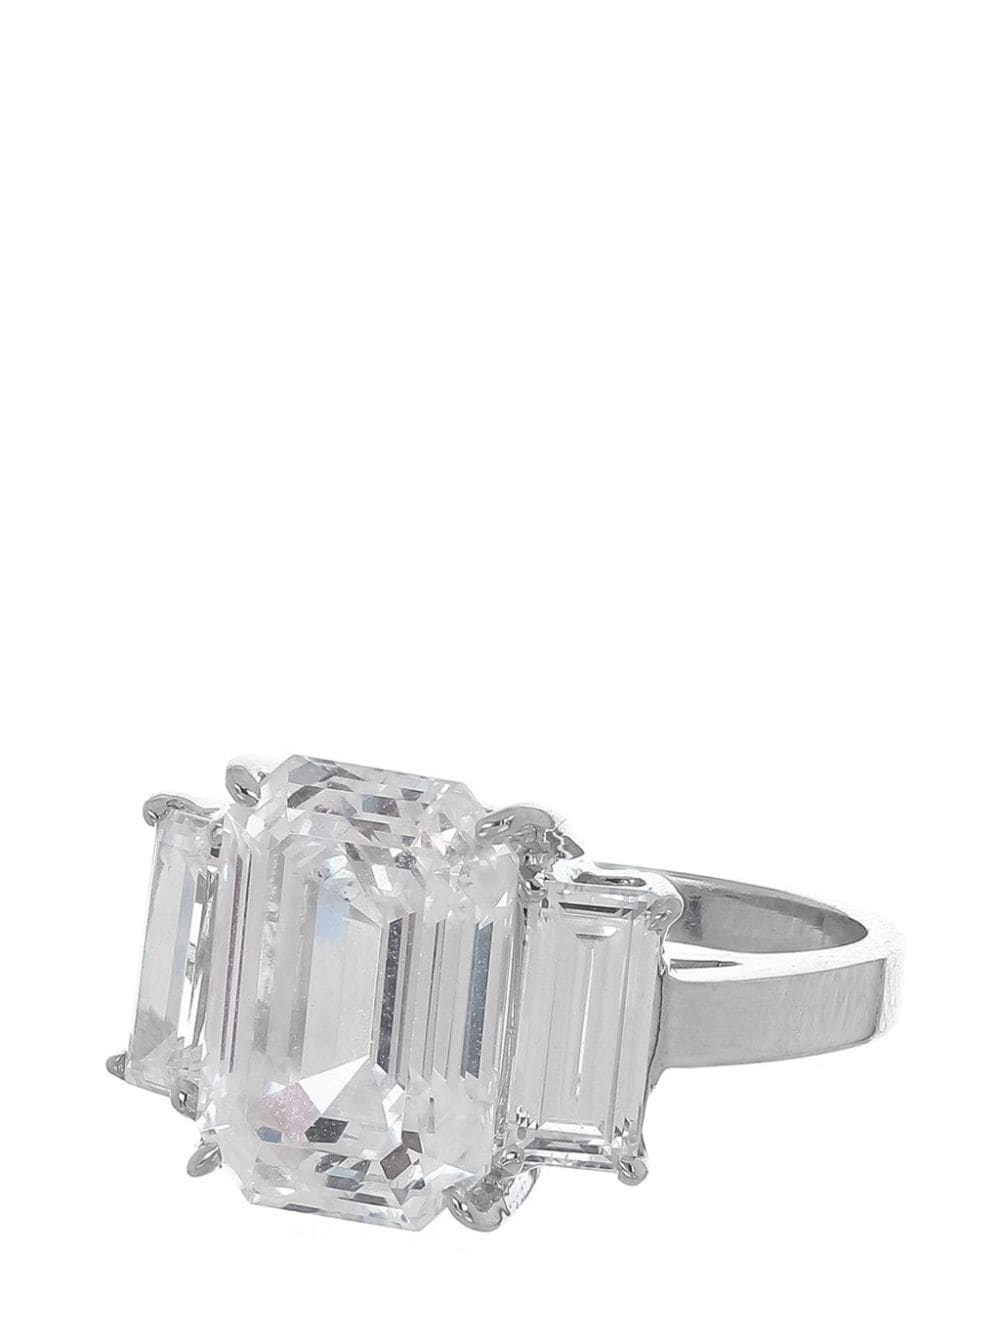 Fantasia by Deserio 14kt white gold cubic zirconia ring - Wit